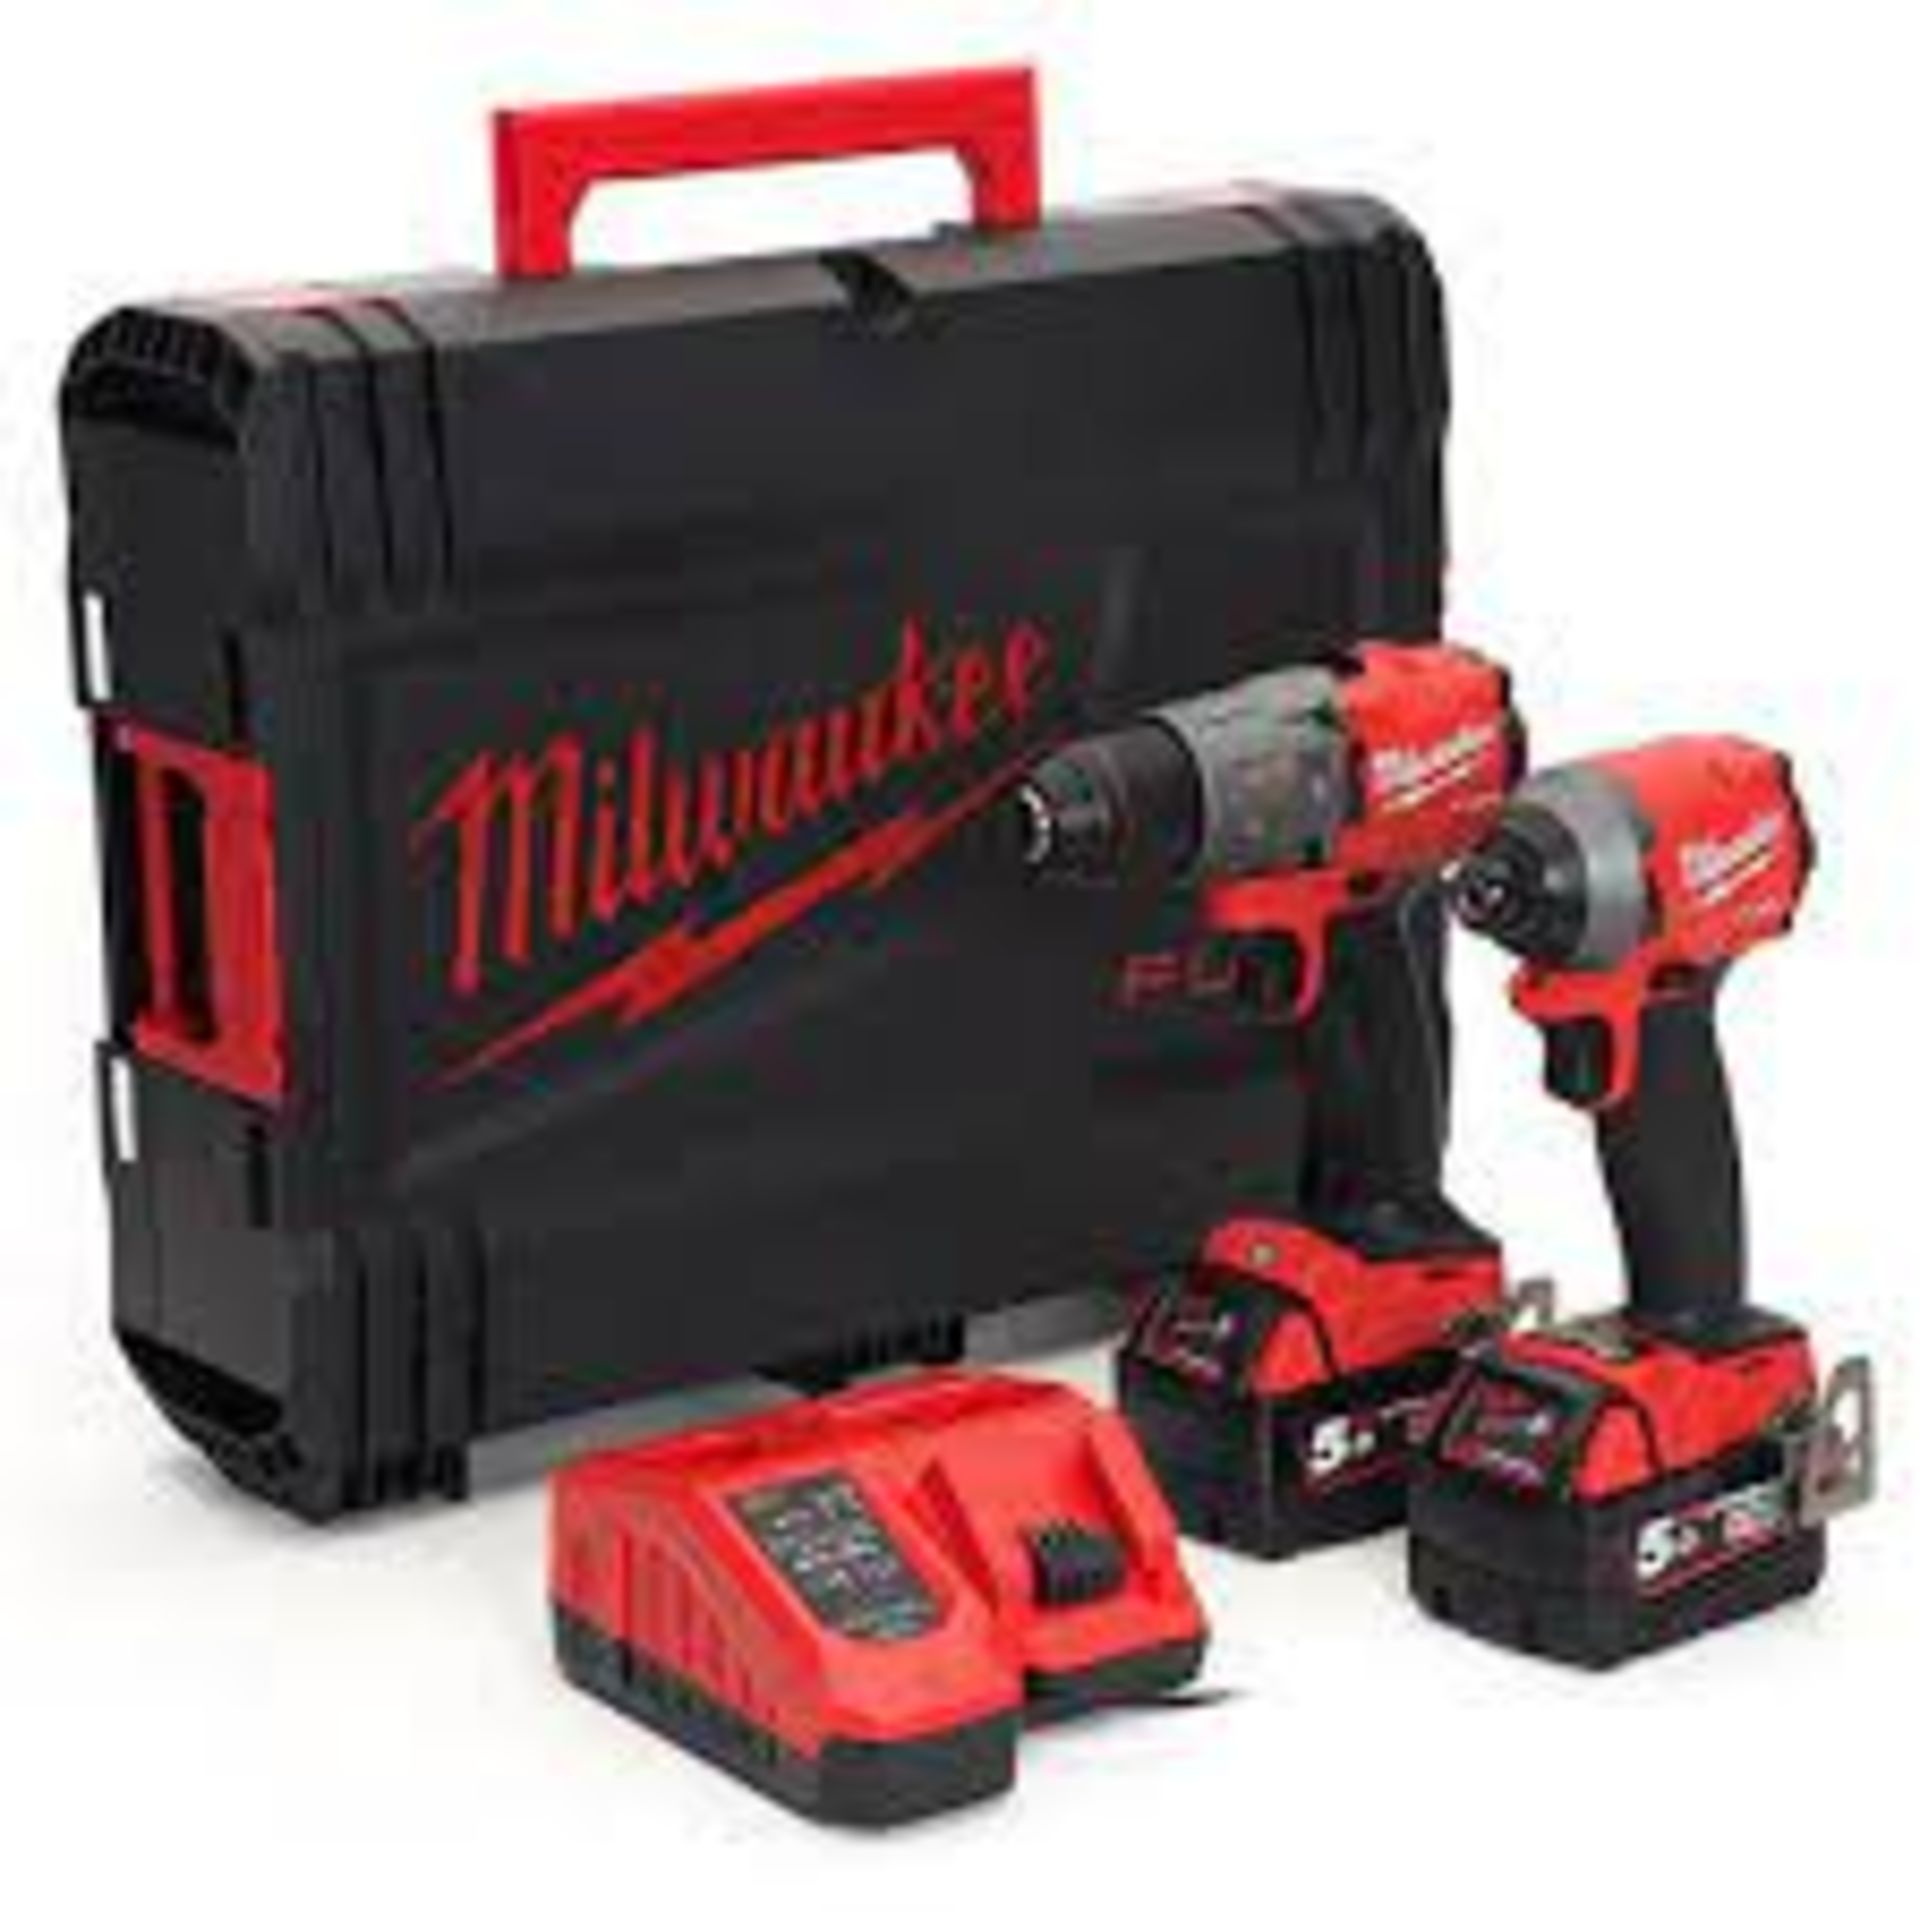 Milwaukee M18FPP2A2-502X FUEL Gen 3 Combi Drill and Impact Driver. - ER41. RRP £599.99.Double up